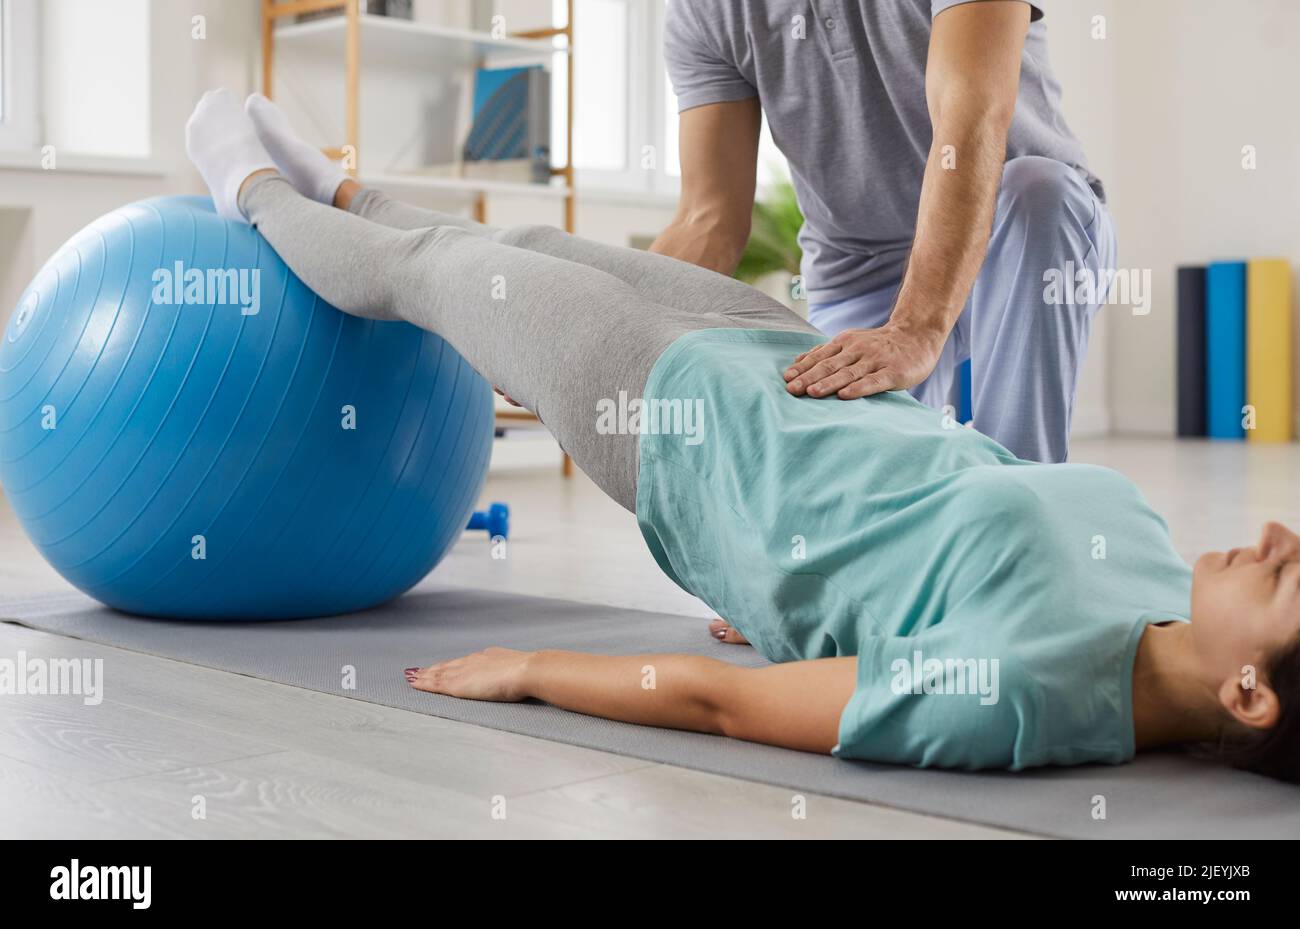 Physiotherapy specialist helping young woman do rehabilitation exercises with fit ball Stock Photo